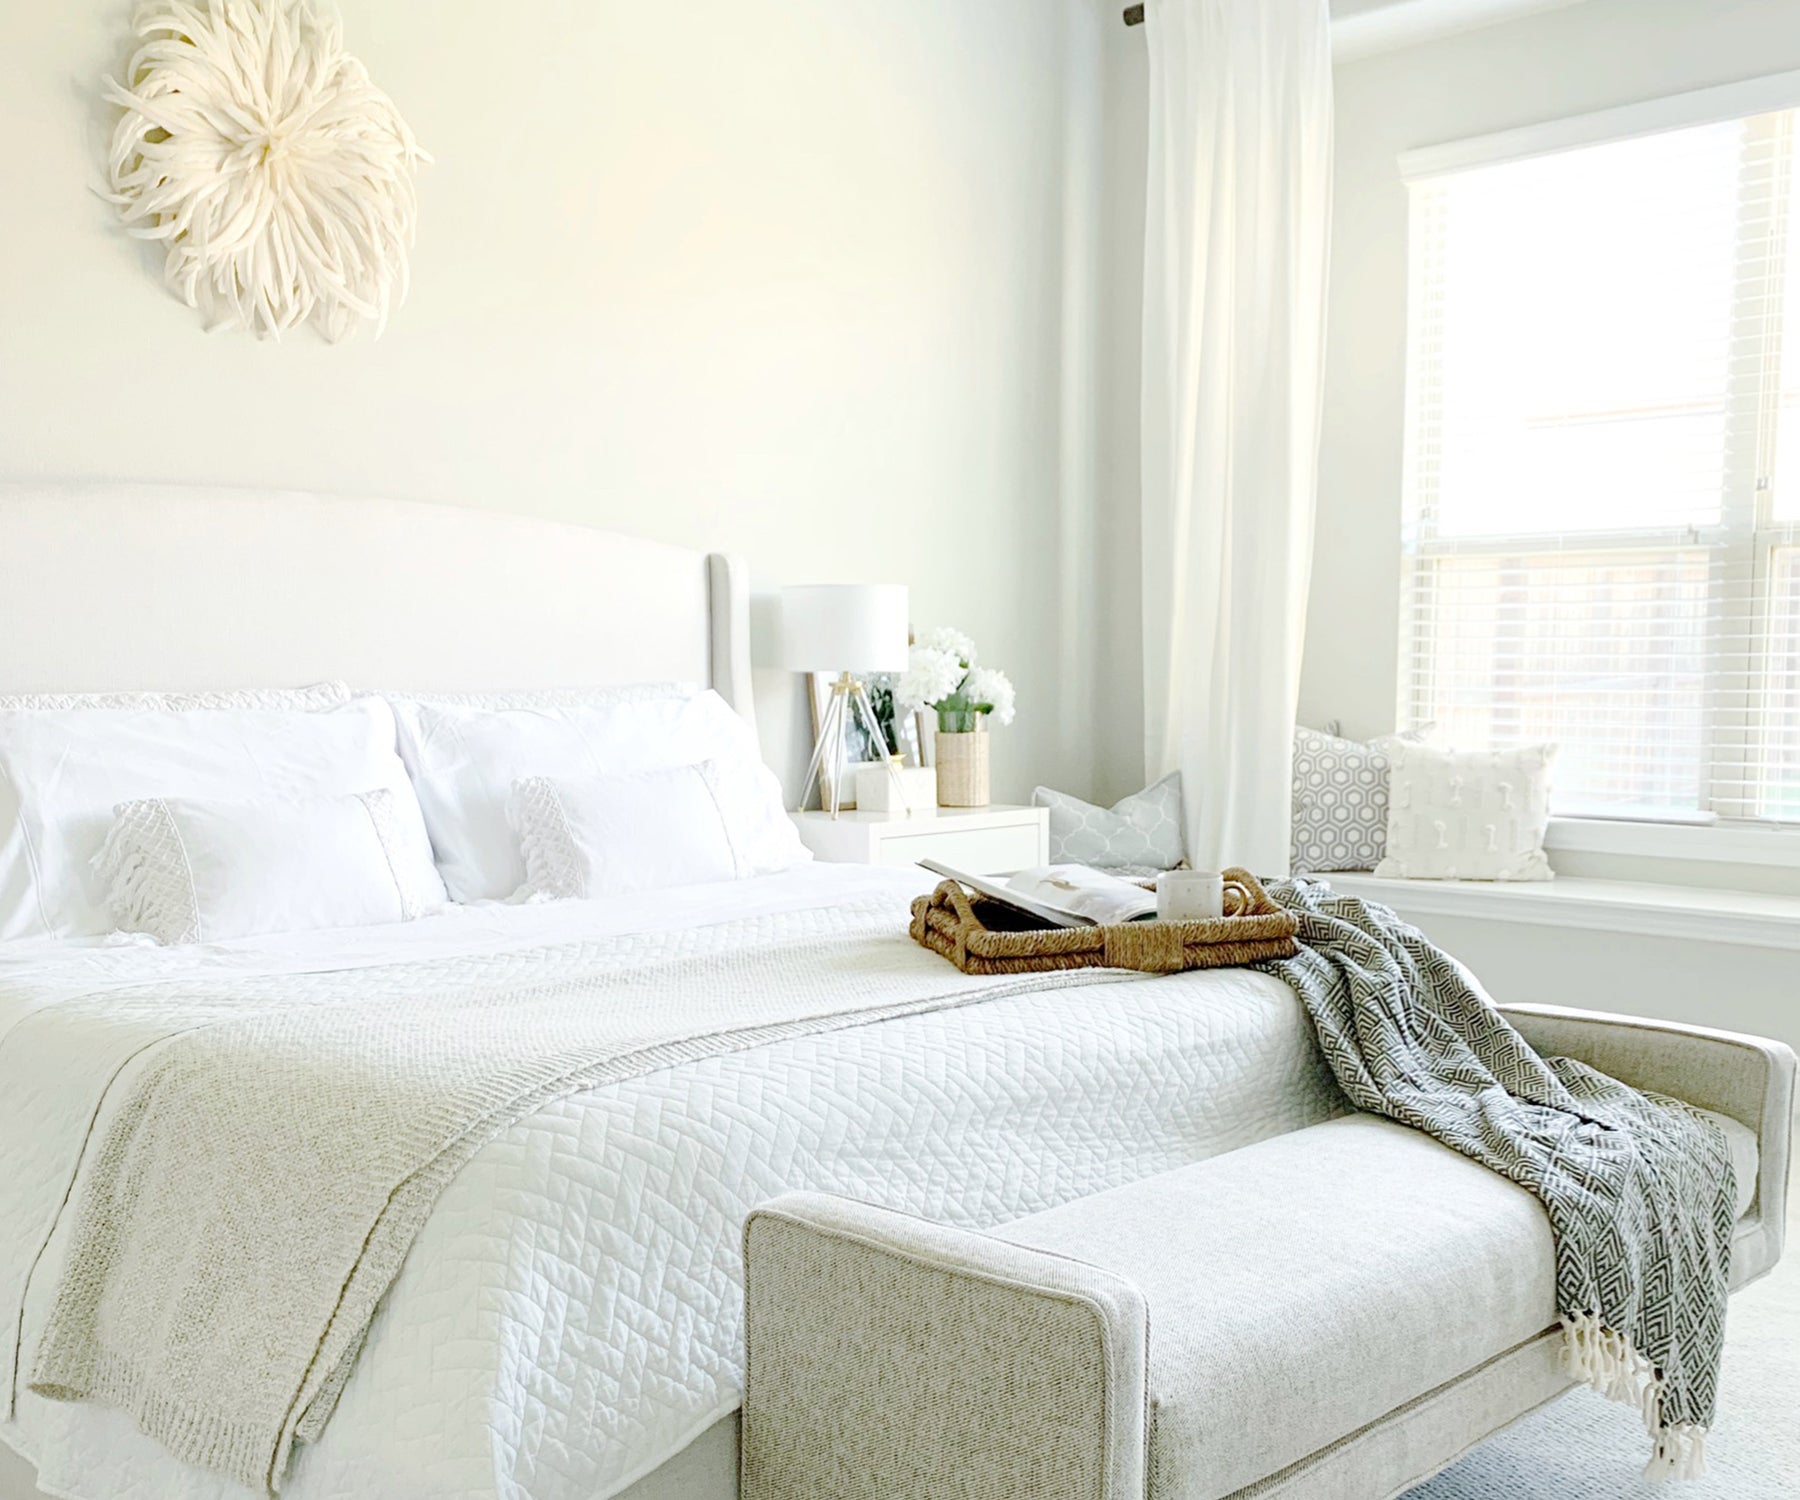 Neat bedroom featuring white cotton bedding and a matching chair